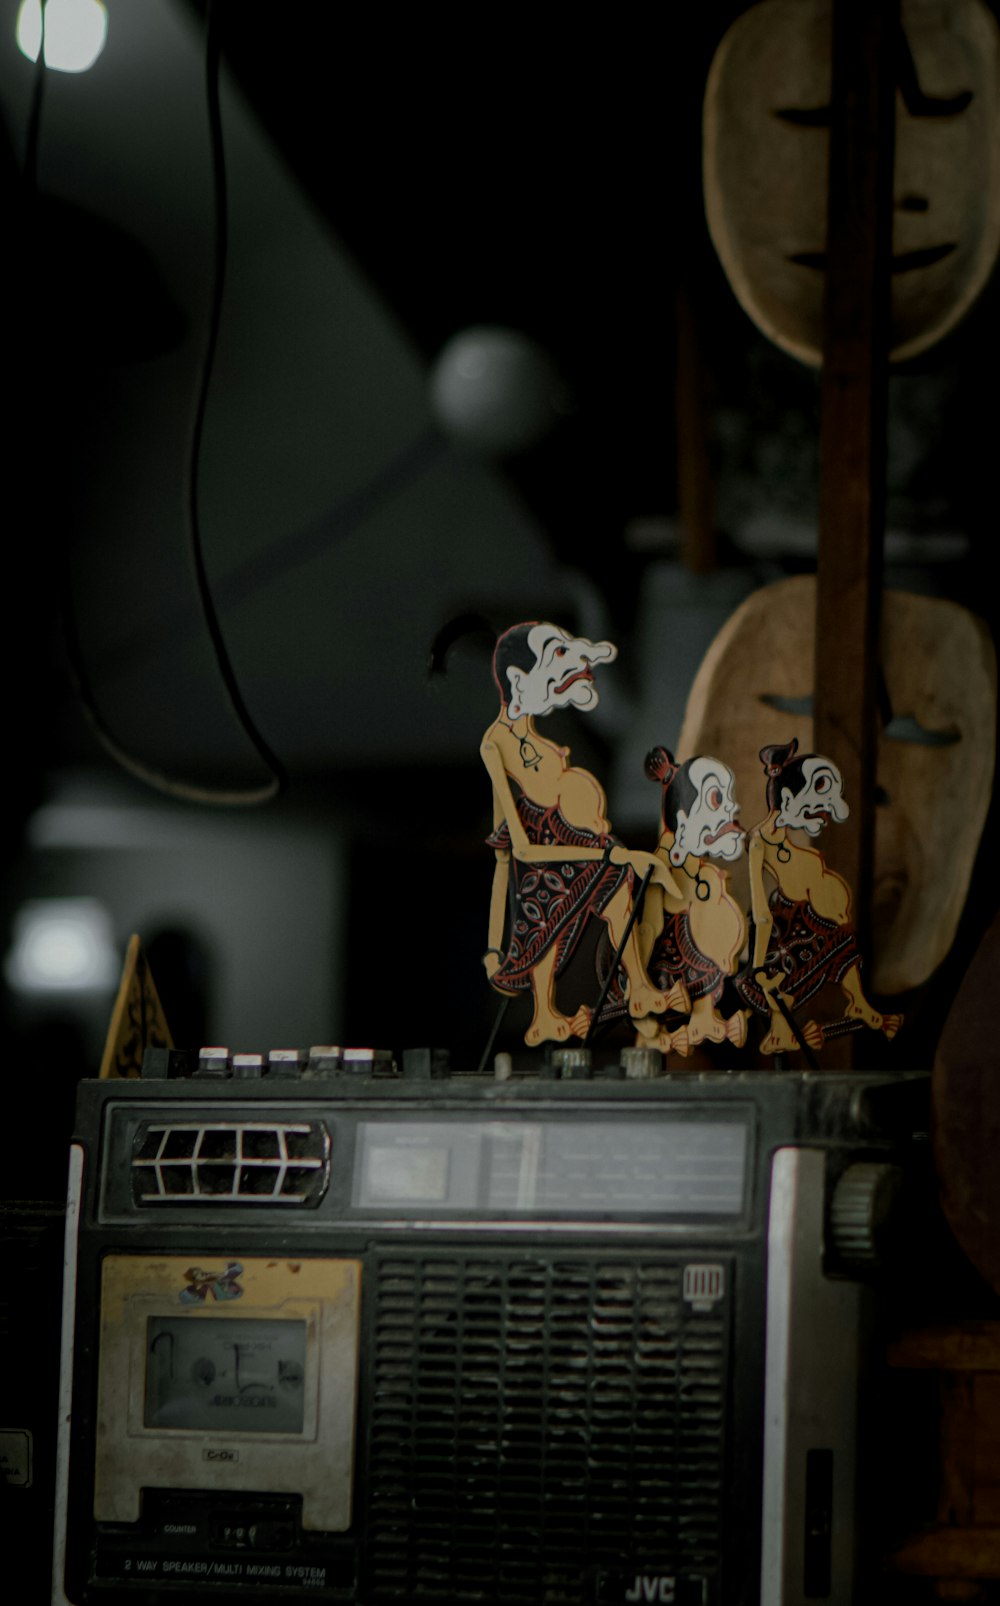 a couple of figurines sitting on top of a radio